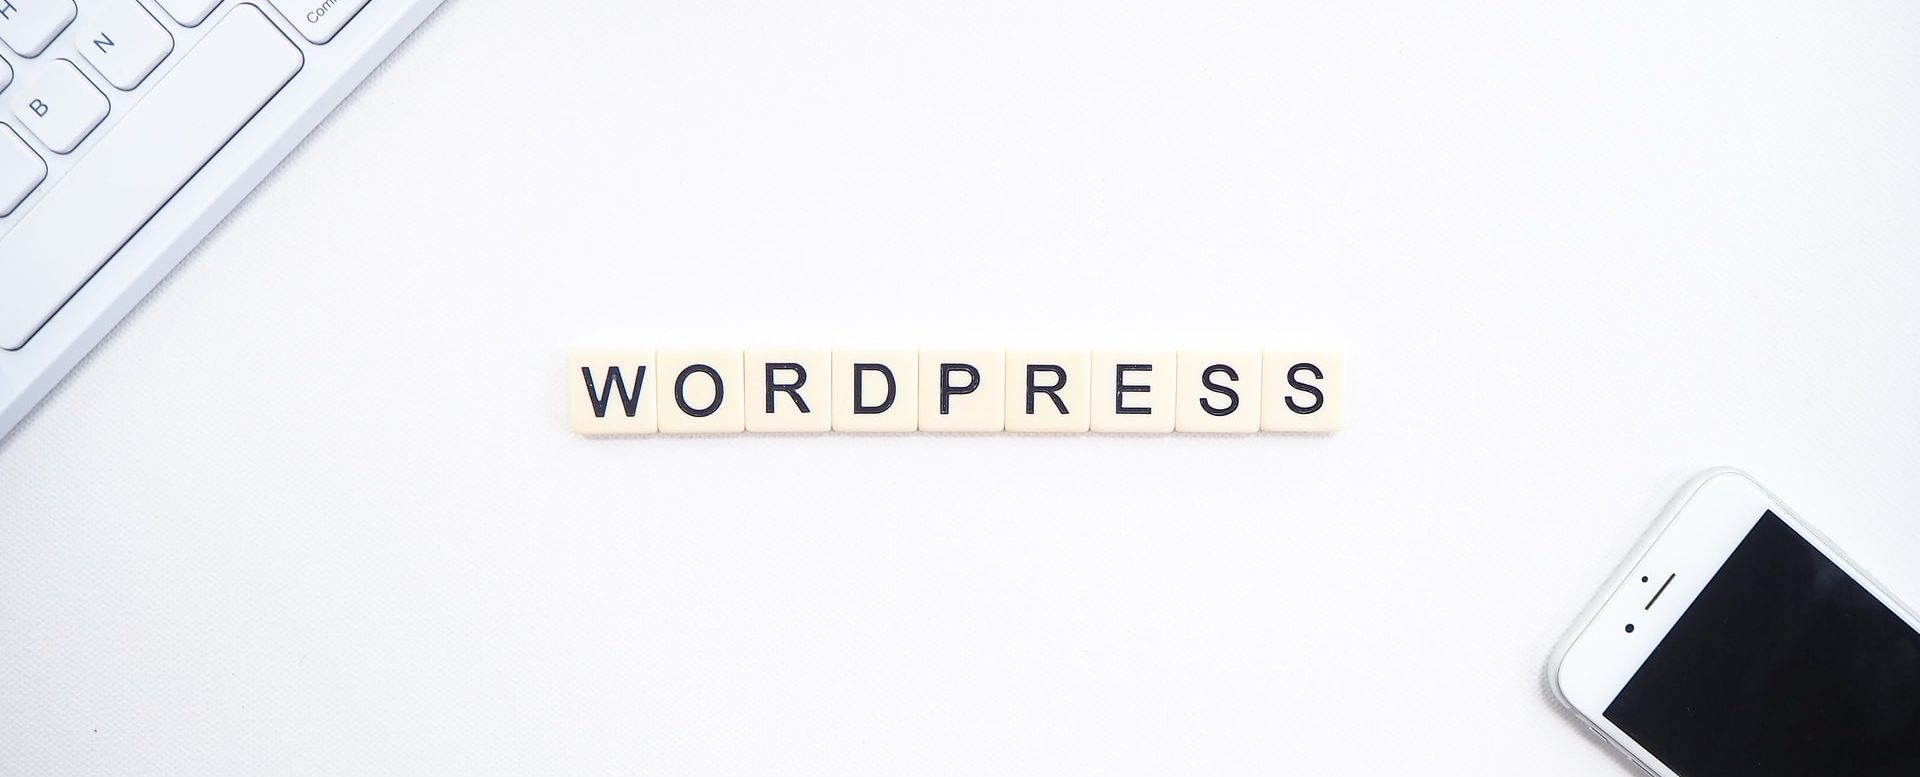 You are currently viewing How To Choose The Best WordPress Theme For Your Blog.